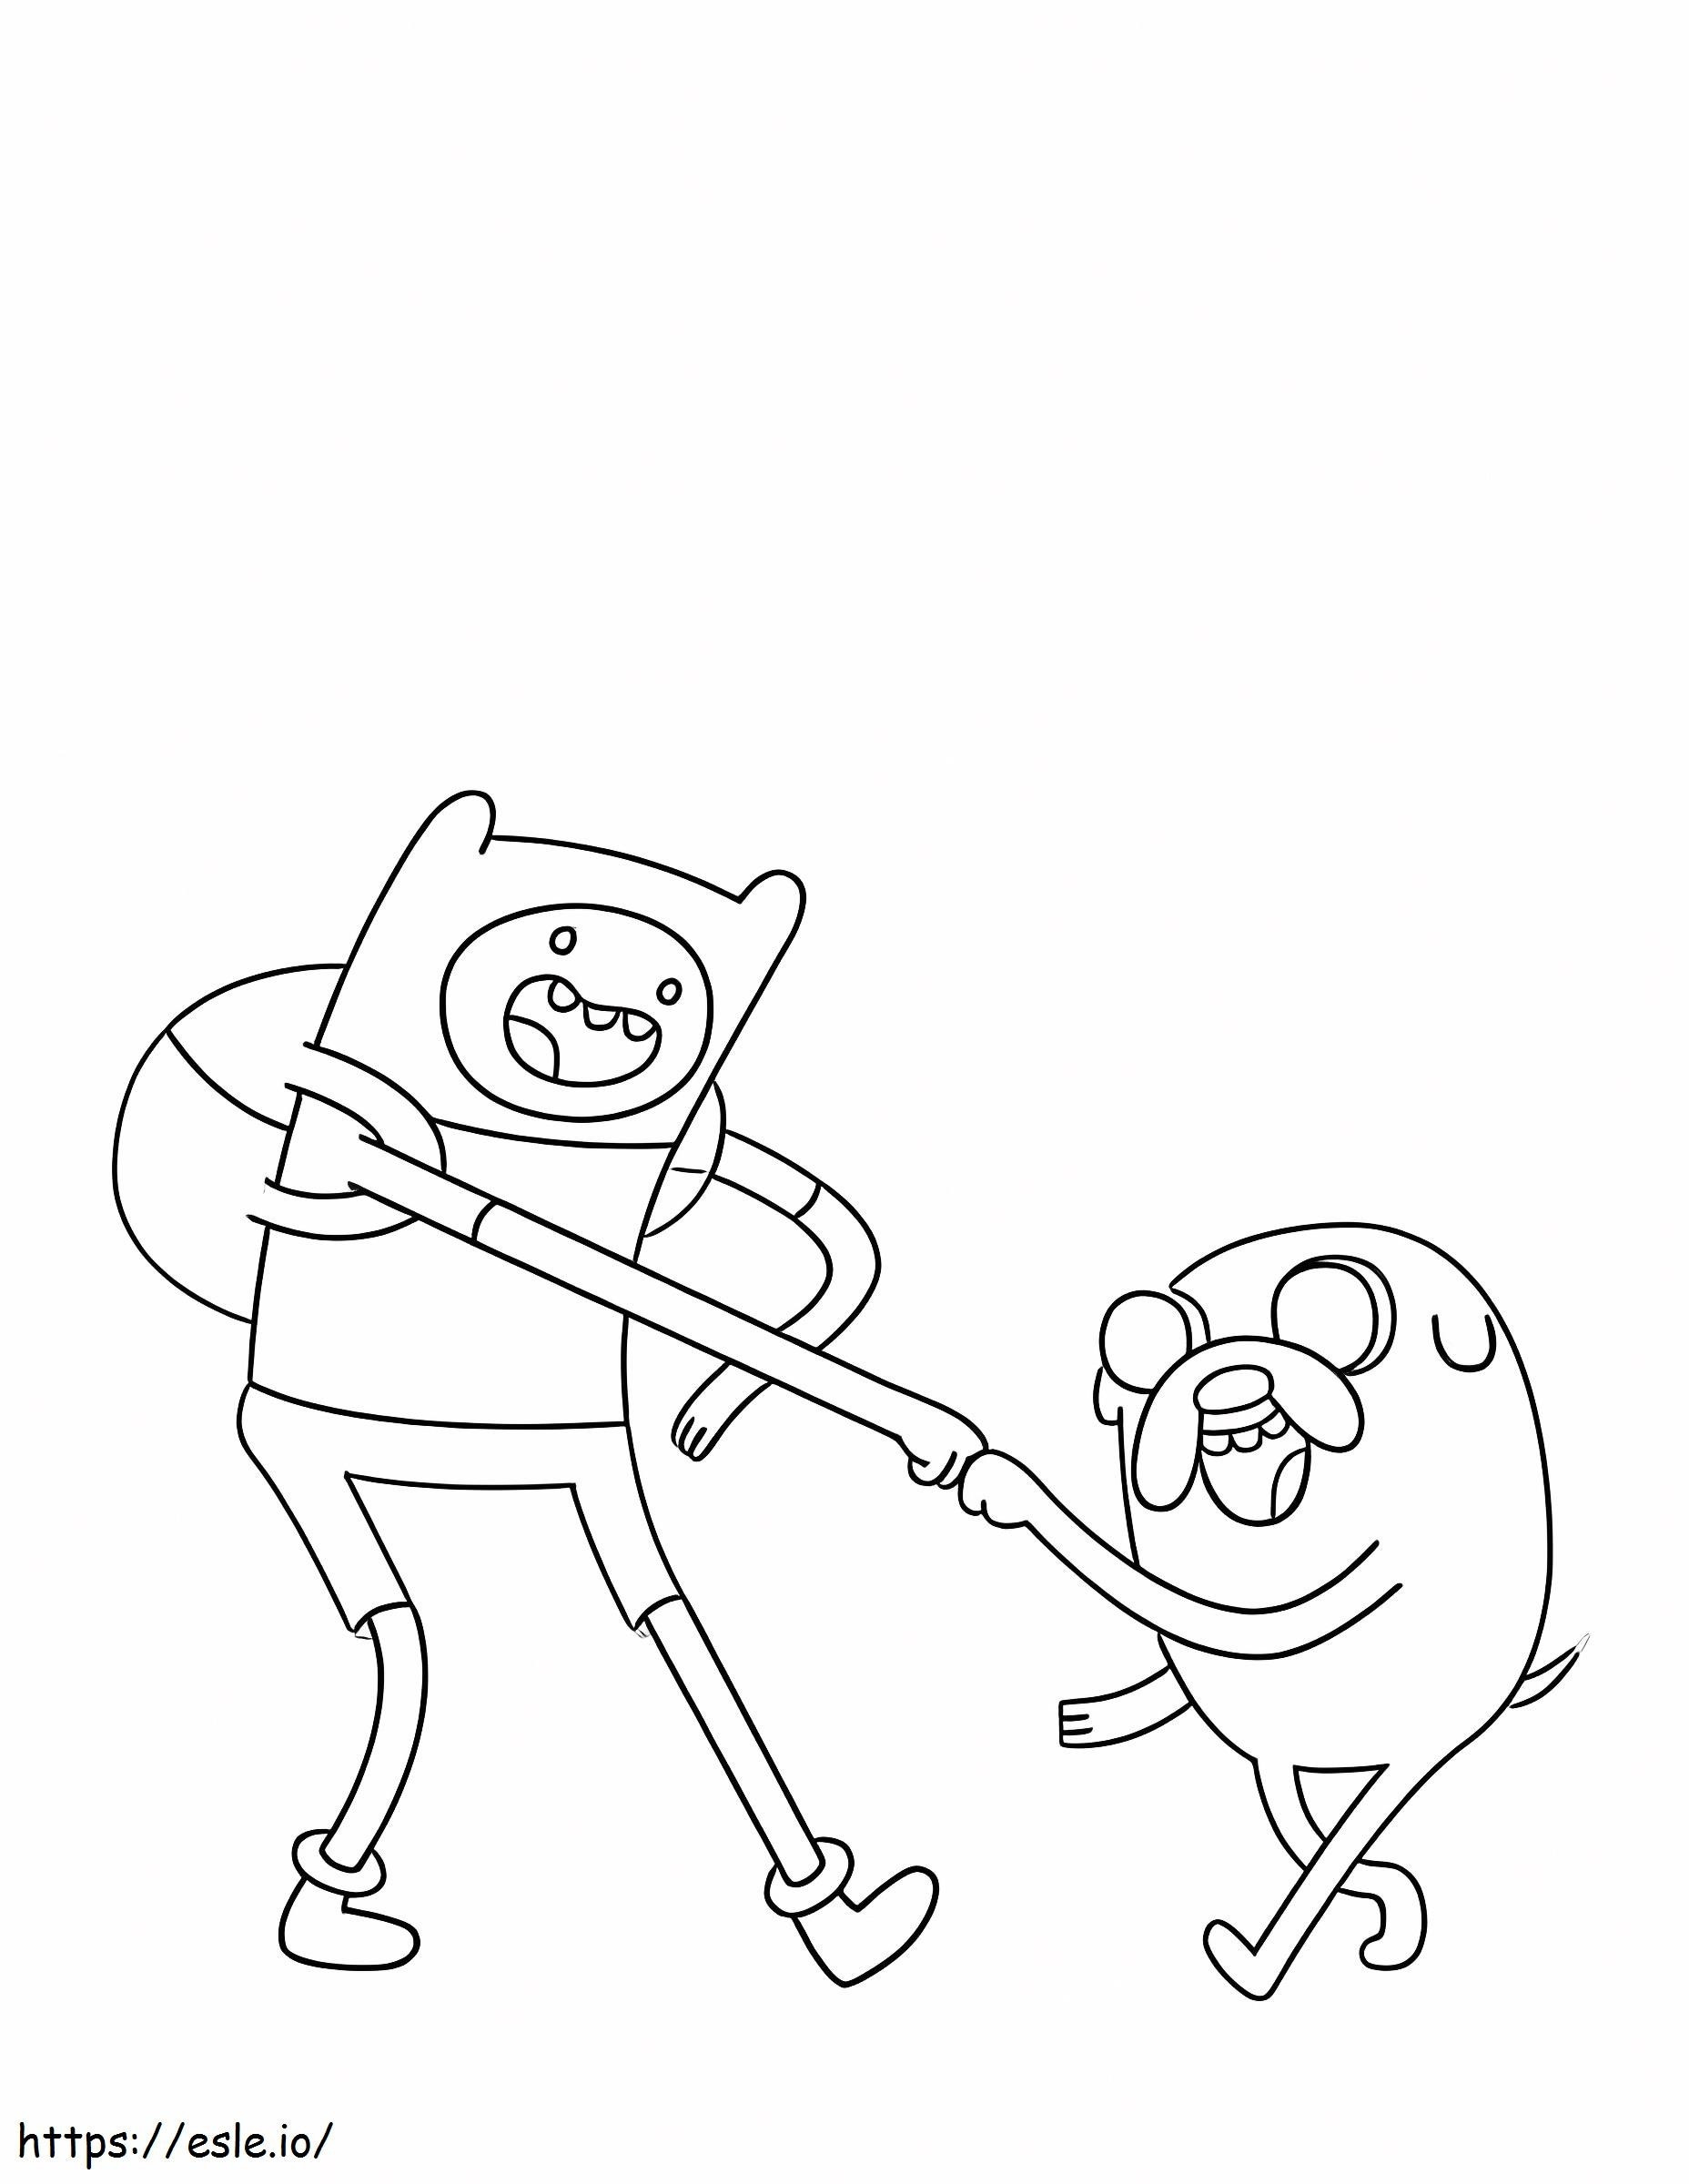 Funny Finn And Jake coloring page